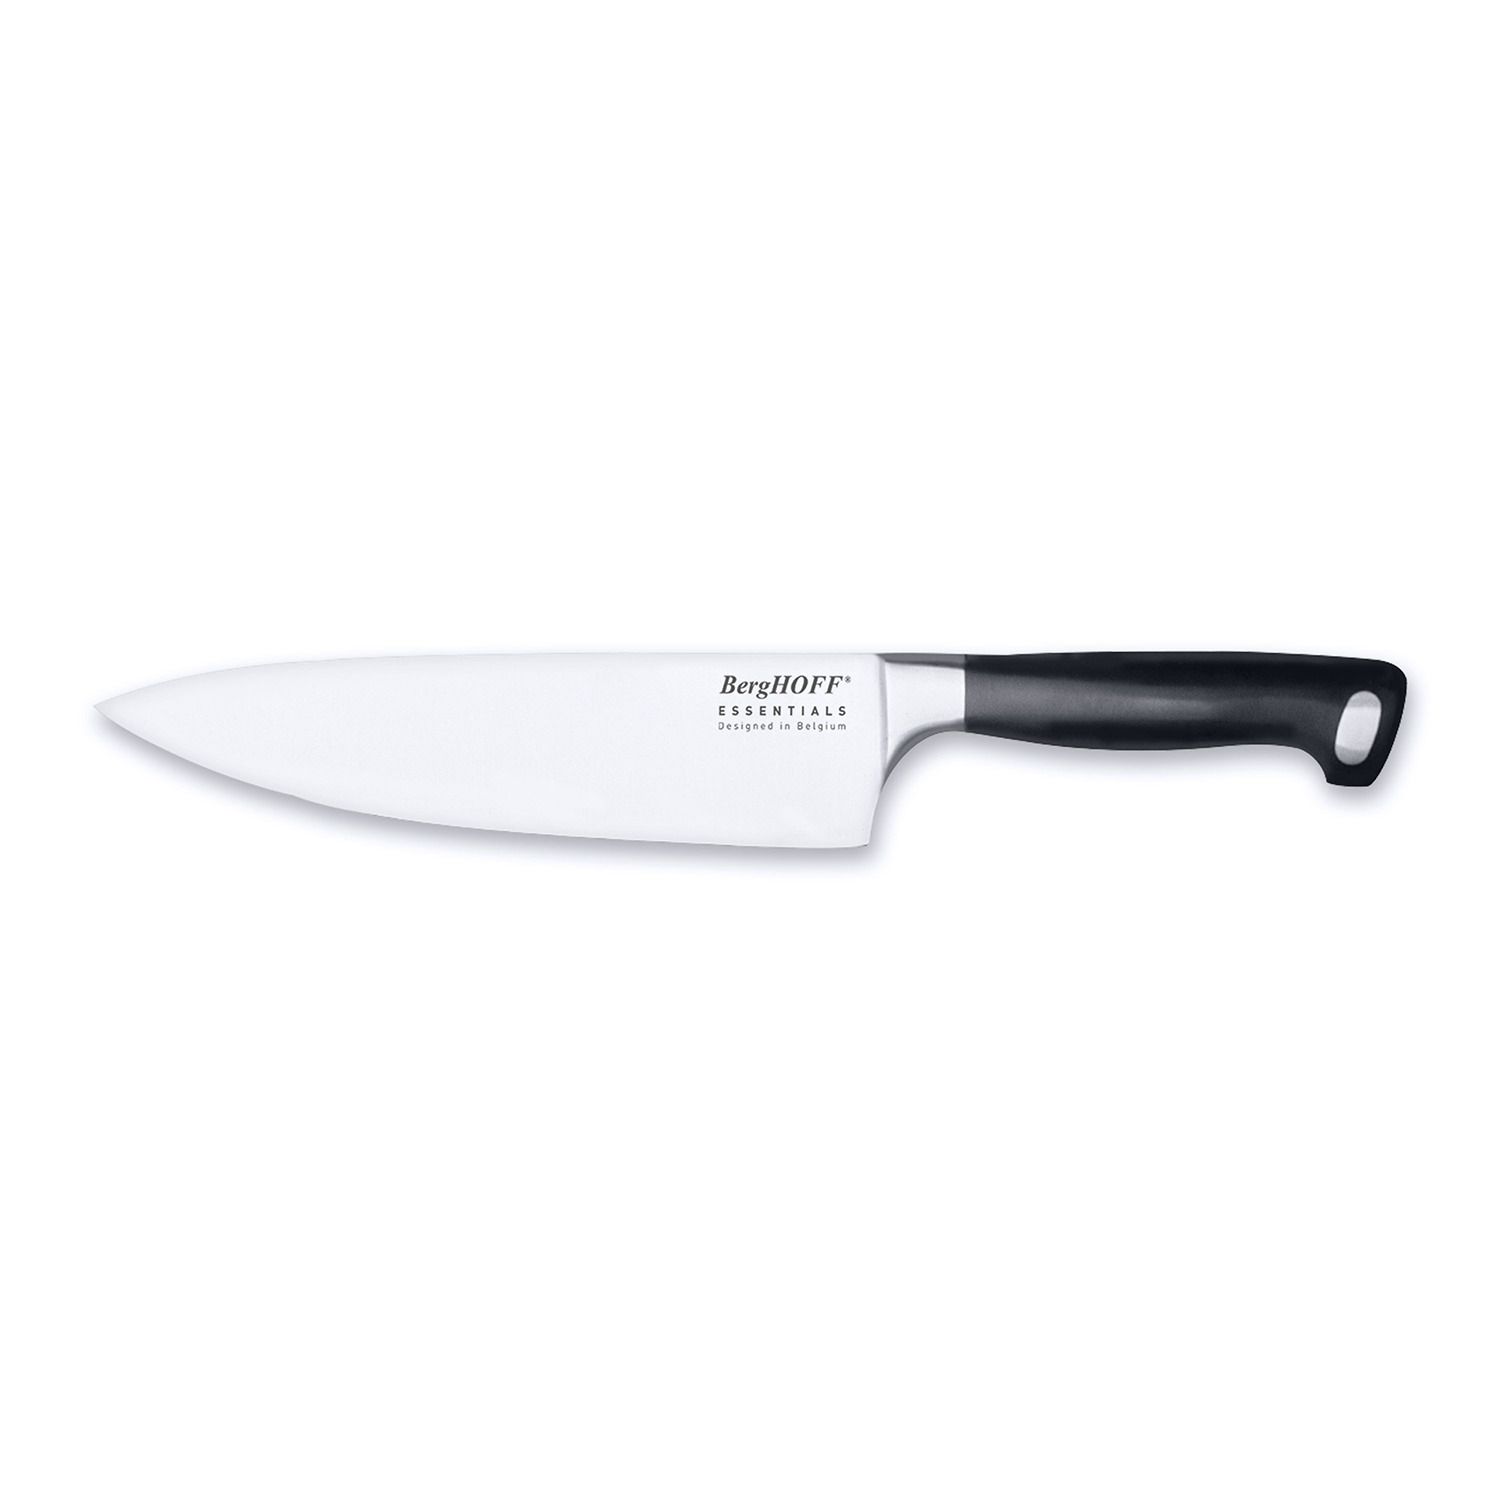 Brentwood Appliances 7in. Electric Carving Knife - White 